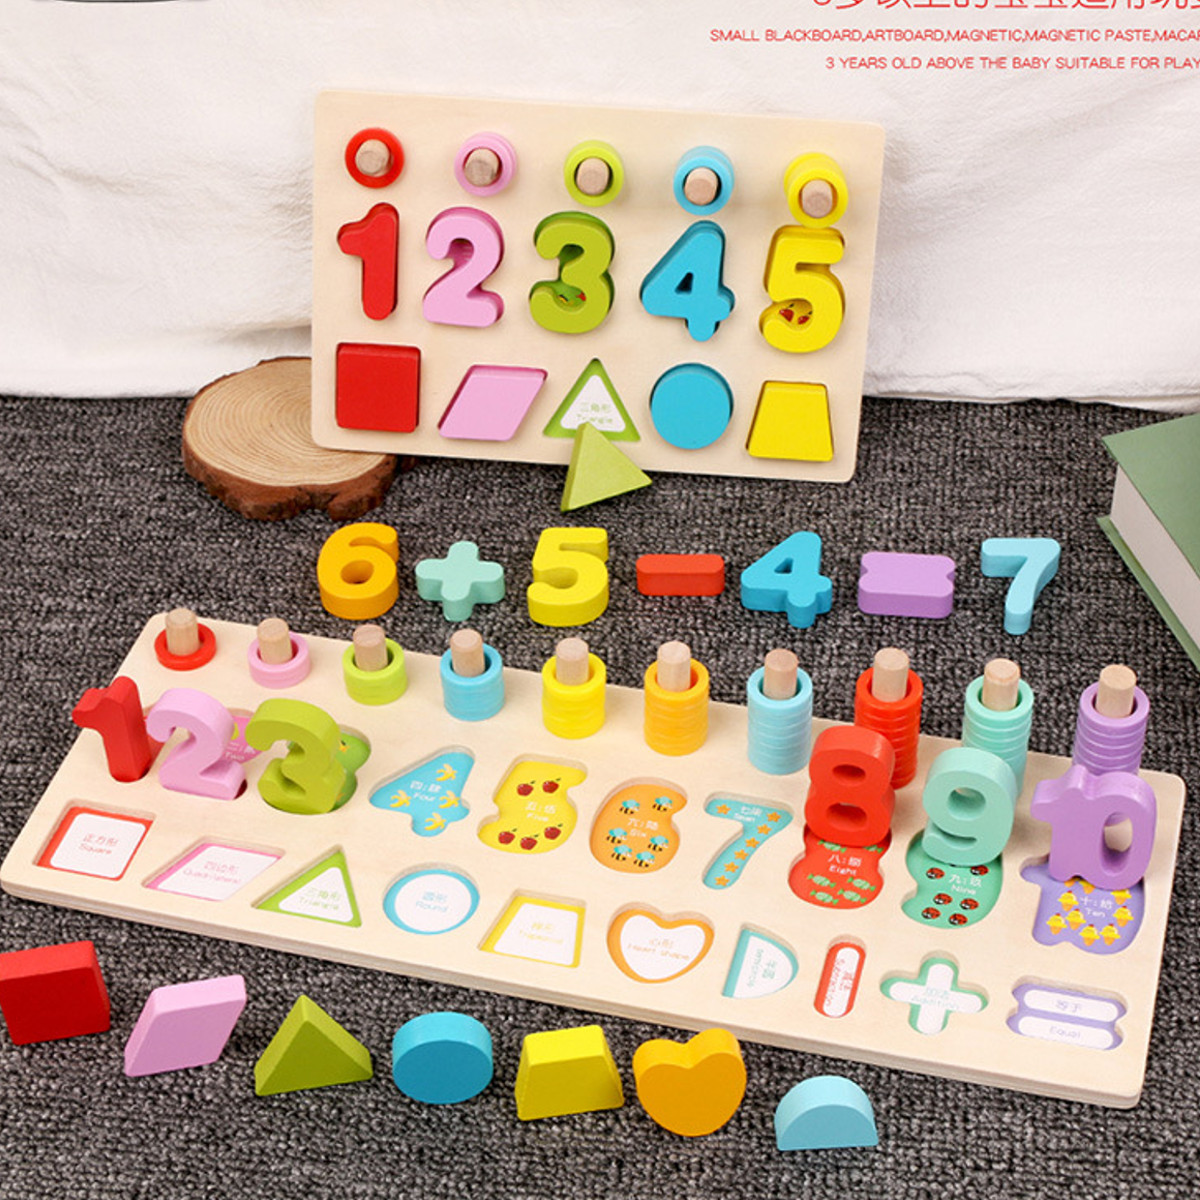 Kids-Wooden-Math-Puzzle-Toys-Numbers-Learning-Hand-Eye-Coordination-Educational-Games-1665813-6